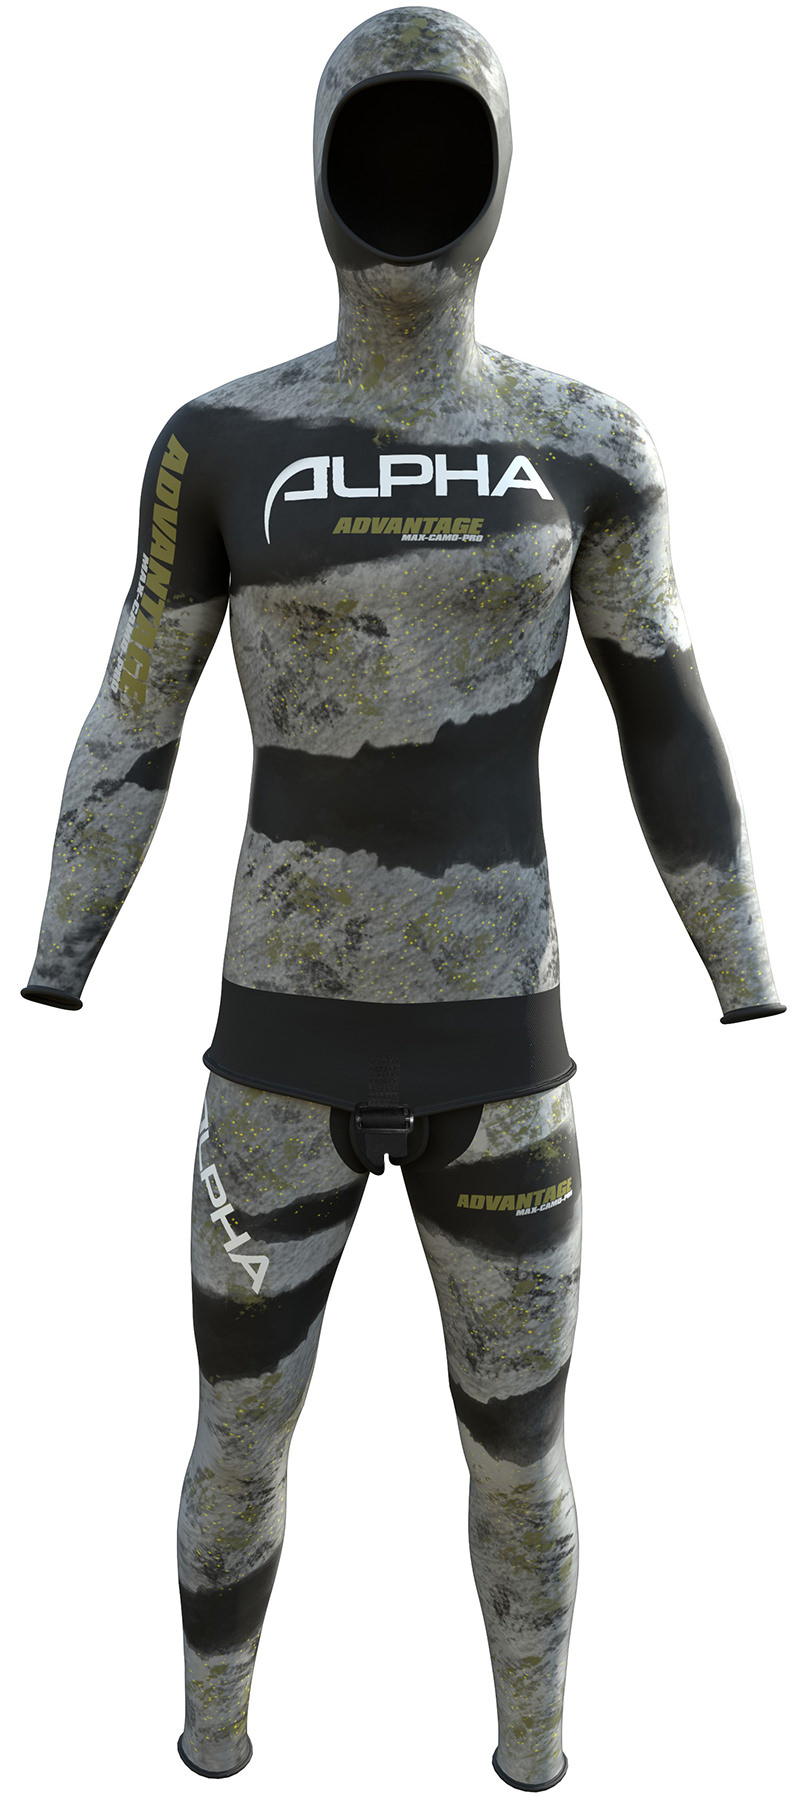 ADVANTAGE MAX-CAMO PRO spearfishing wetsuits smooth skin